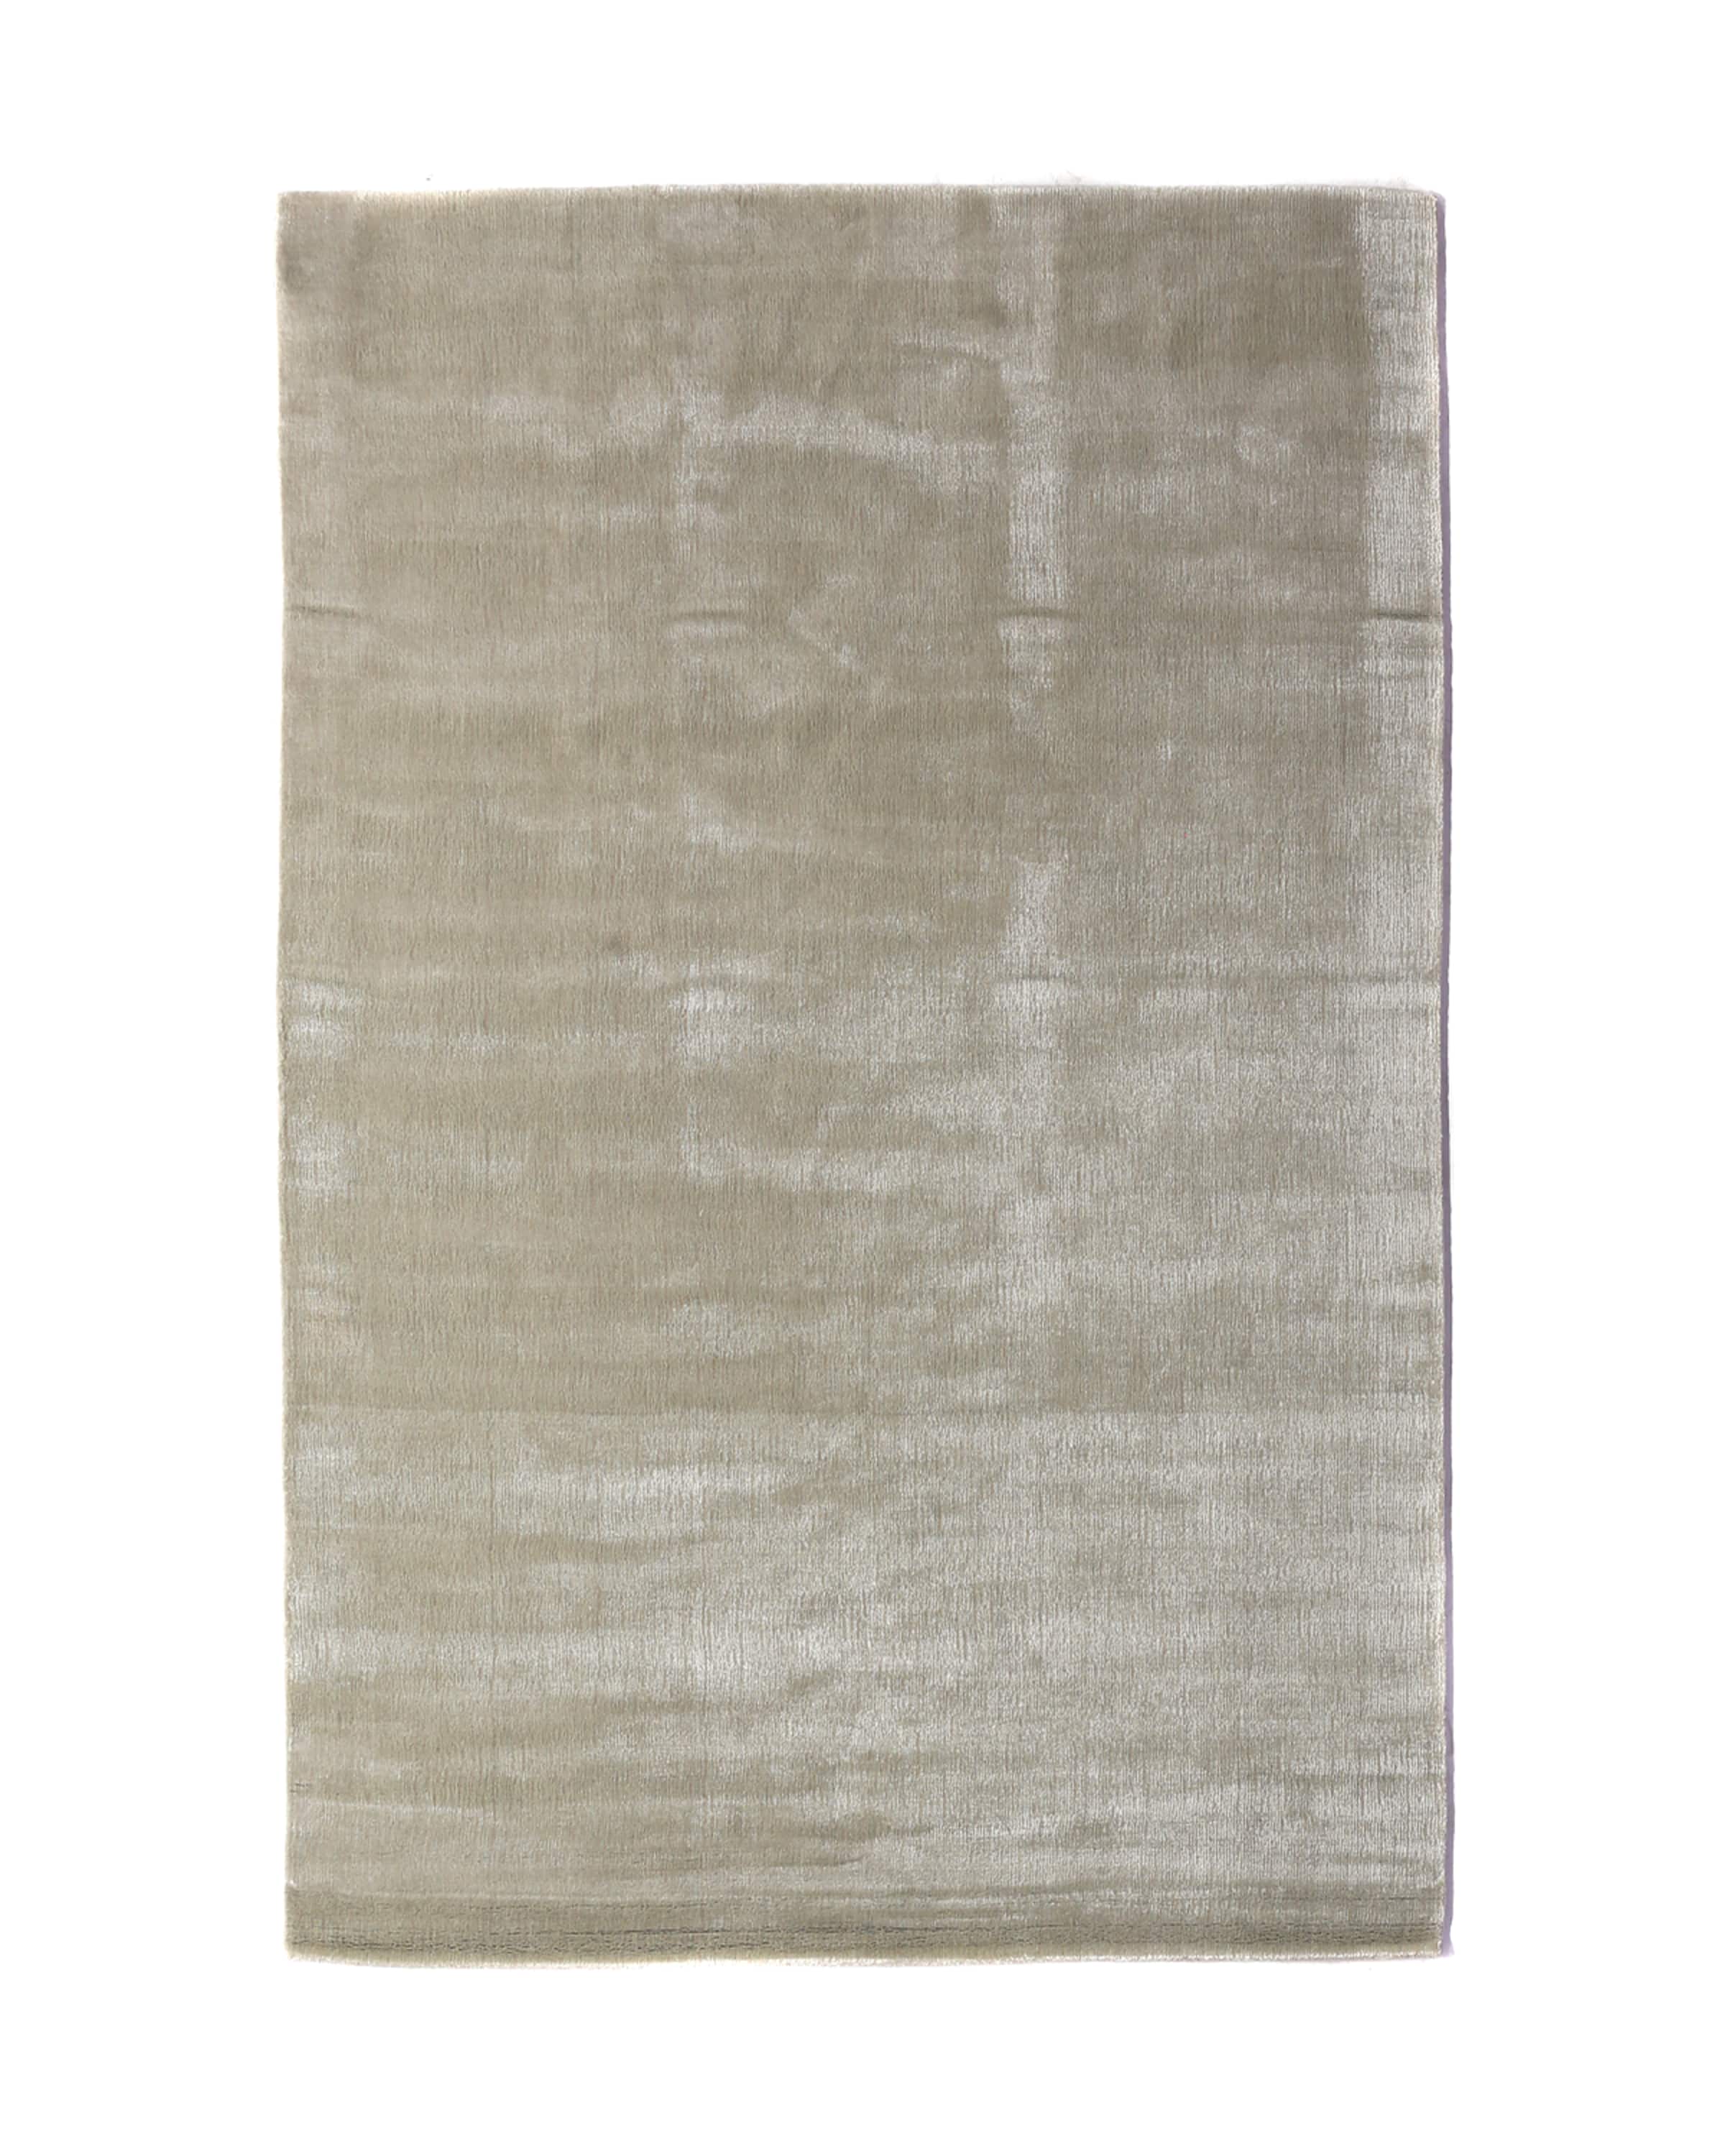 Exquisite Rugs Gwendolyn Rug, 9' x 12'